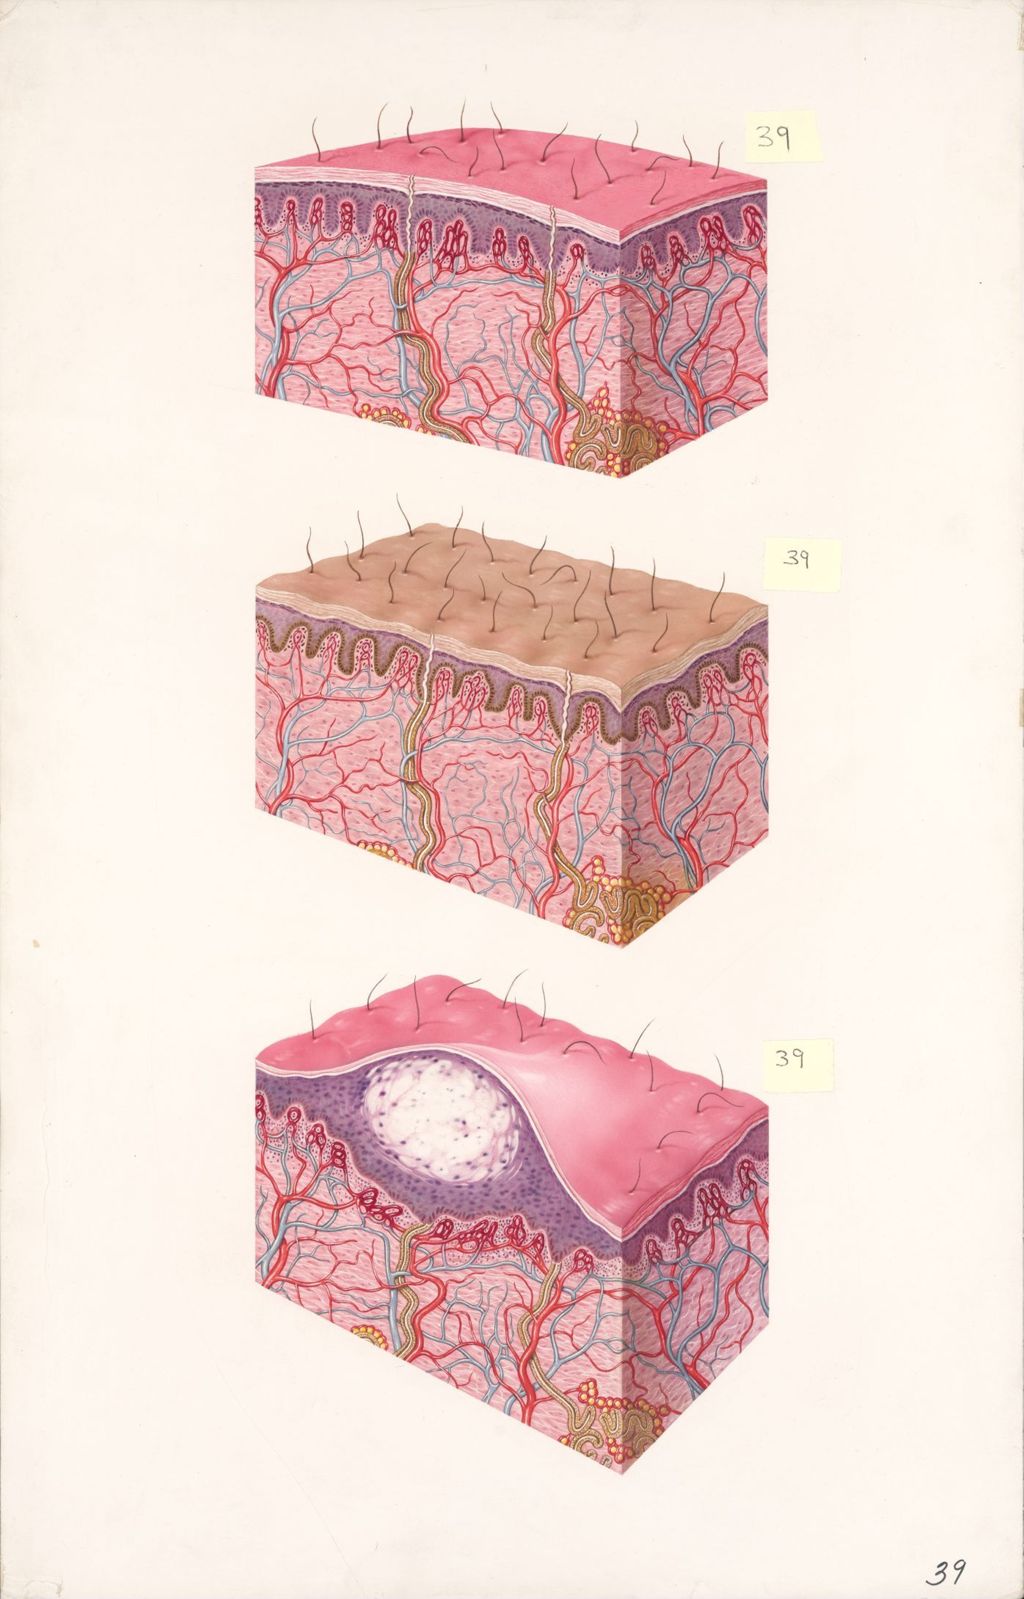 Miniature of Medical Profiles, Skin changes due to the action of the ultraviolet light and to sensitivity to the sun's rays